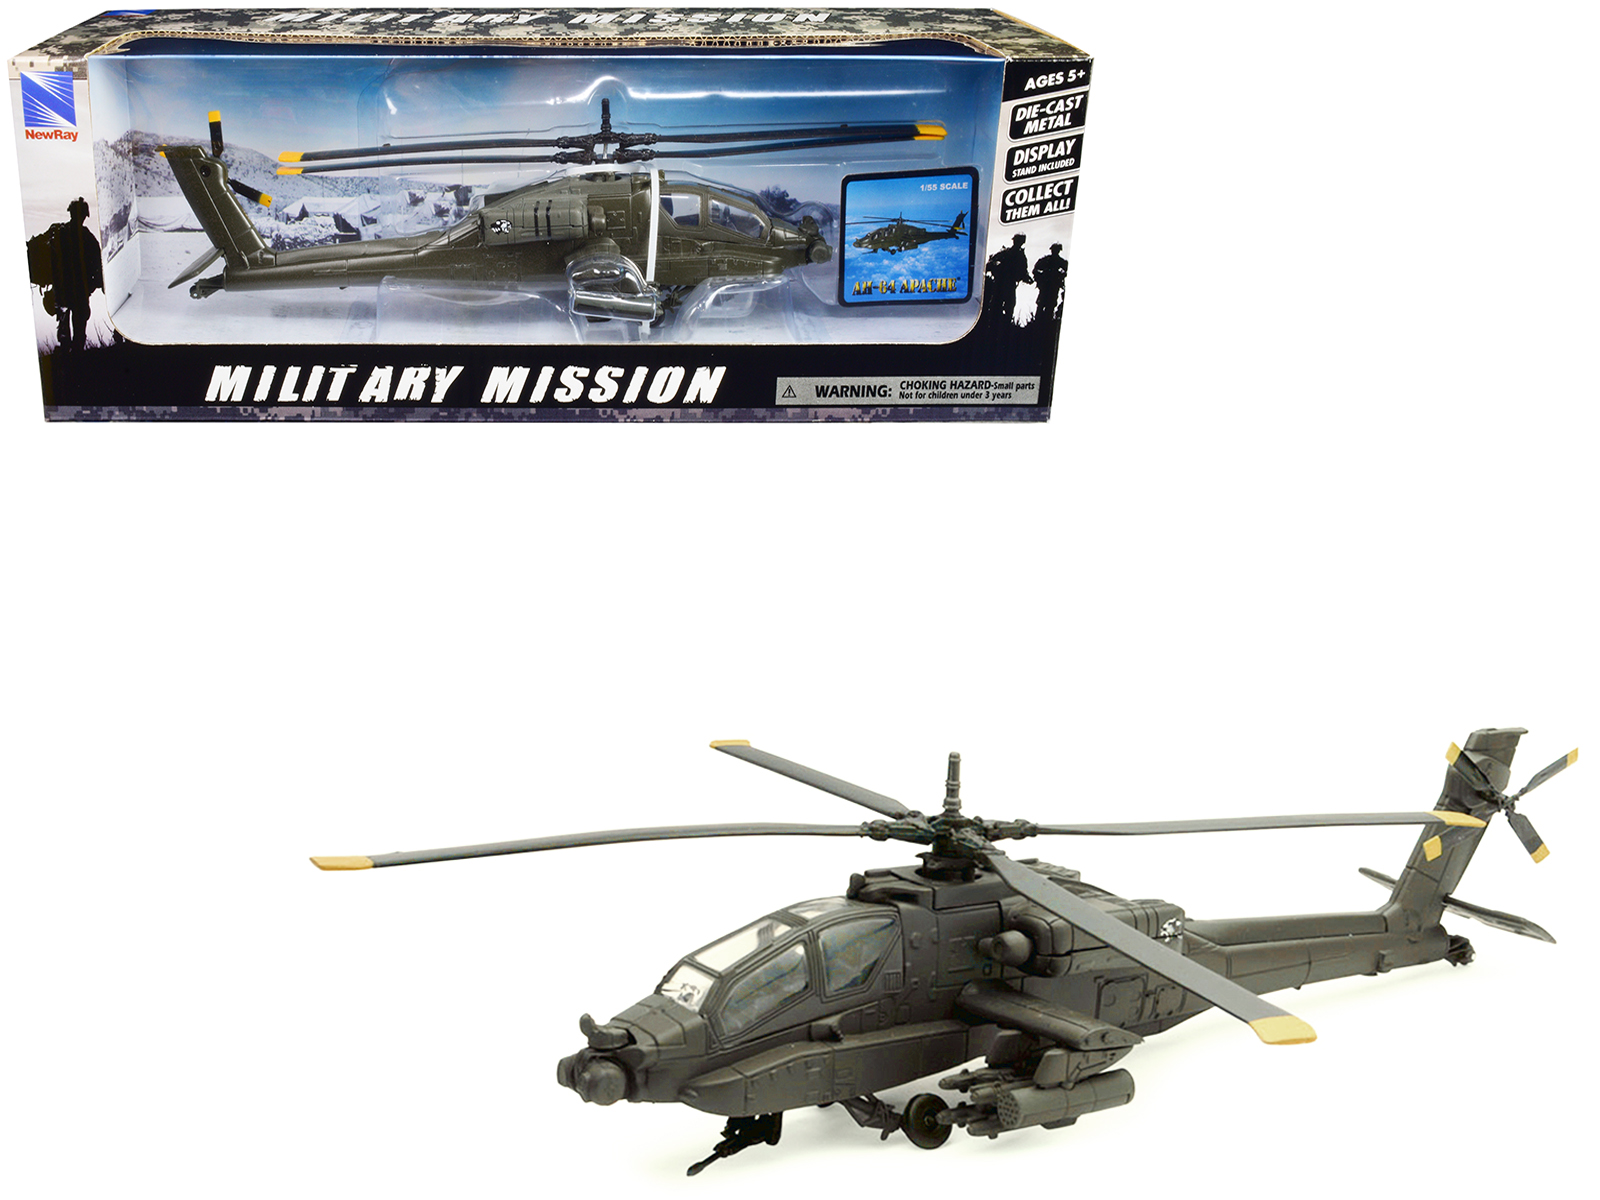 New Ray Boeing AH-64 Apache Attack Helicopter Olive Drab "United States Army" "Military Mission" Series 1/55 Diecast Model by New Ray